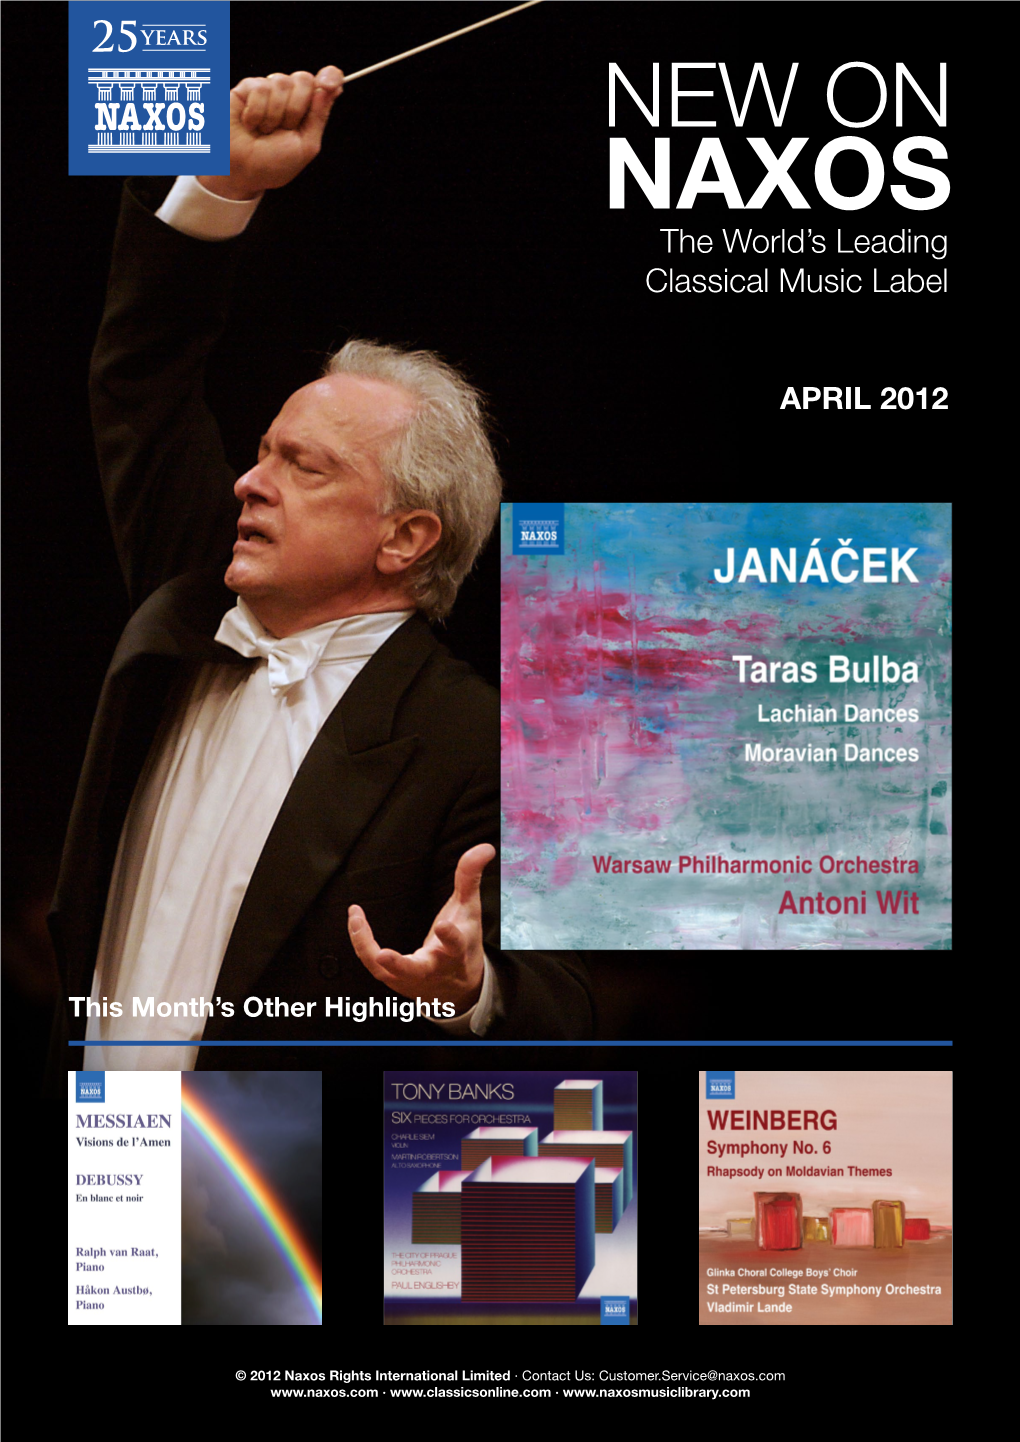 New on Naxos the World’S Leading Classical Music Label